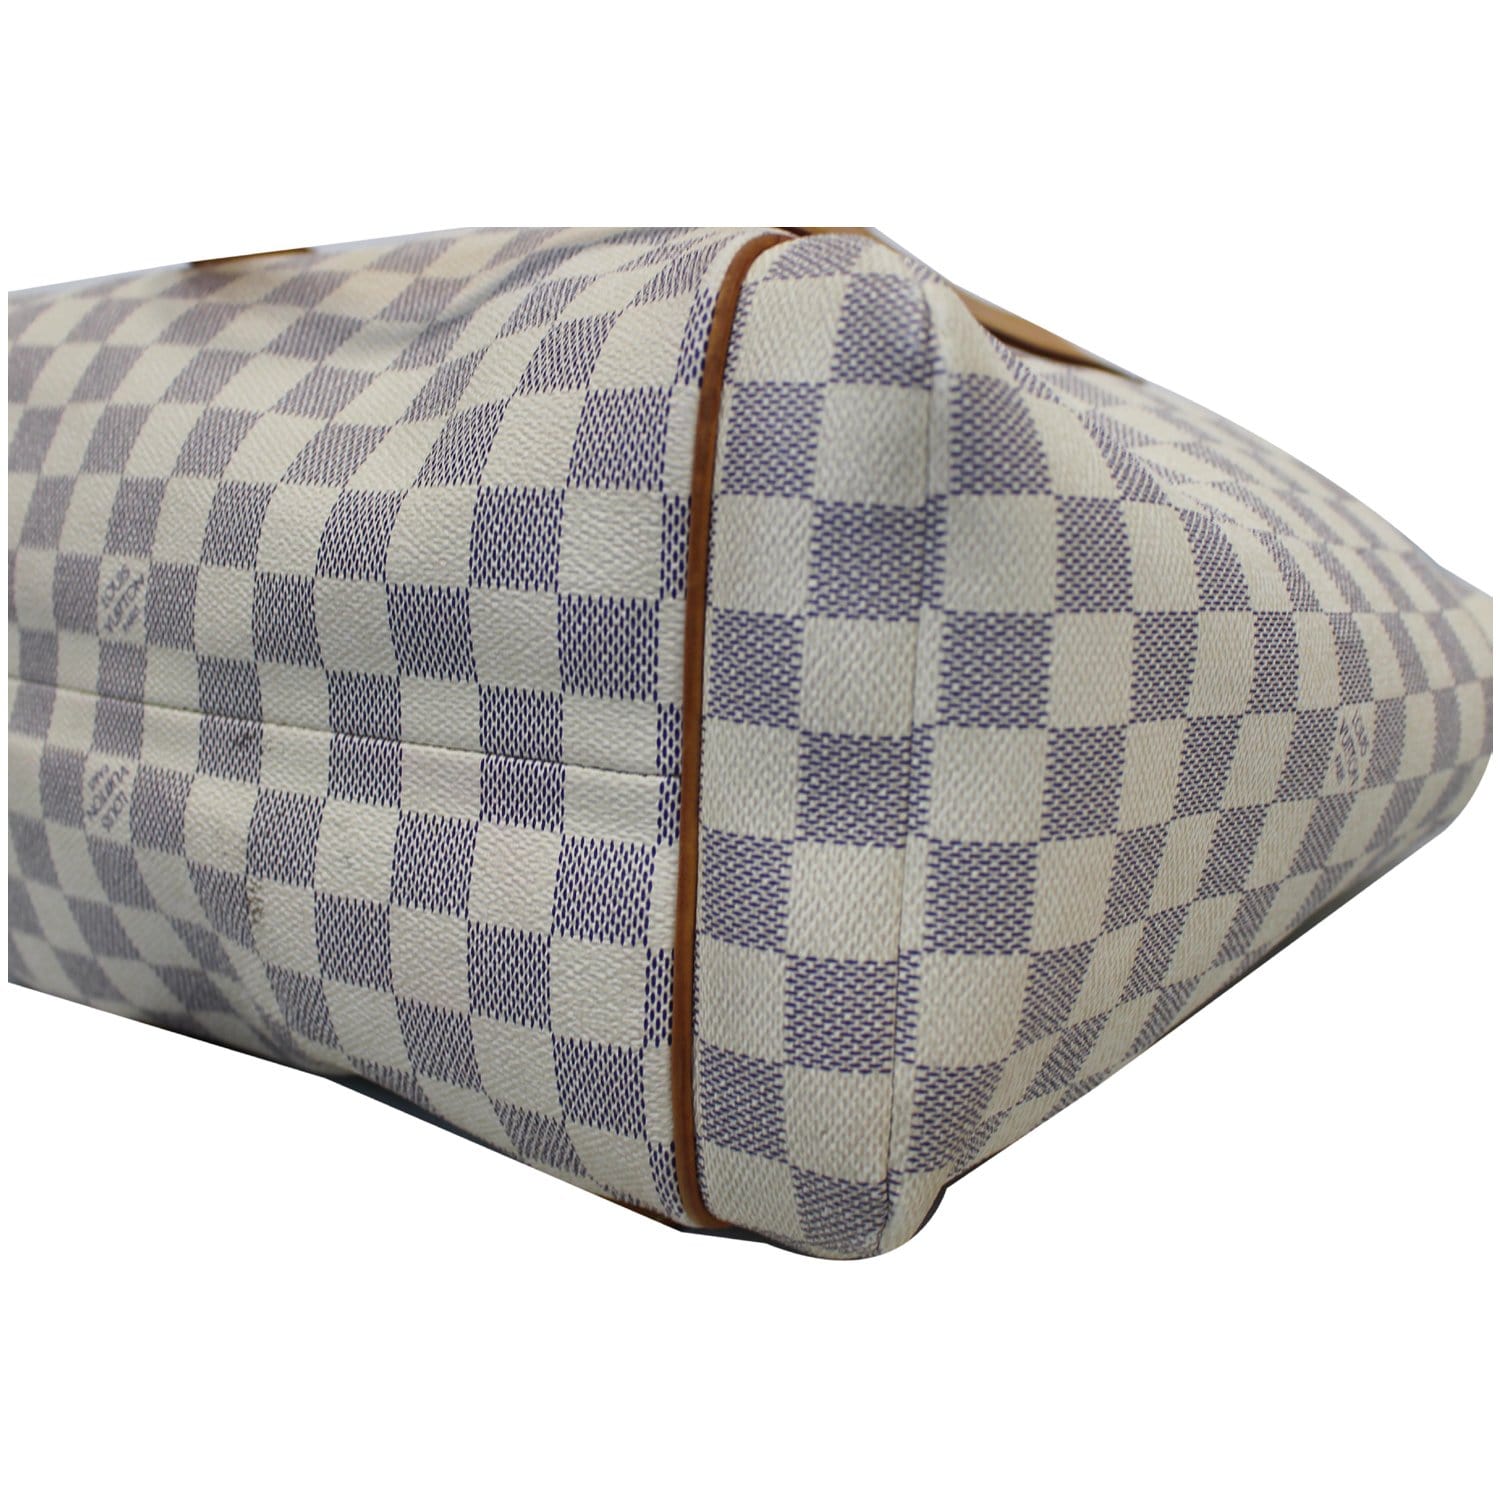 Louis Vuitton, Damier Azur Totally Shoulder Bag, Cream White And Blue  Checkered Rubberized Cotton